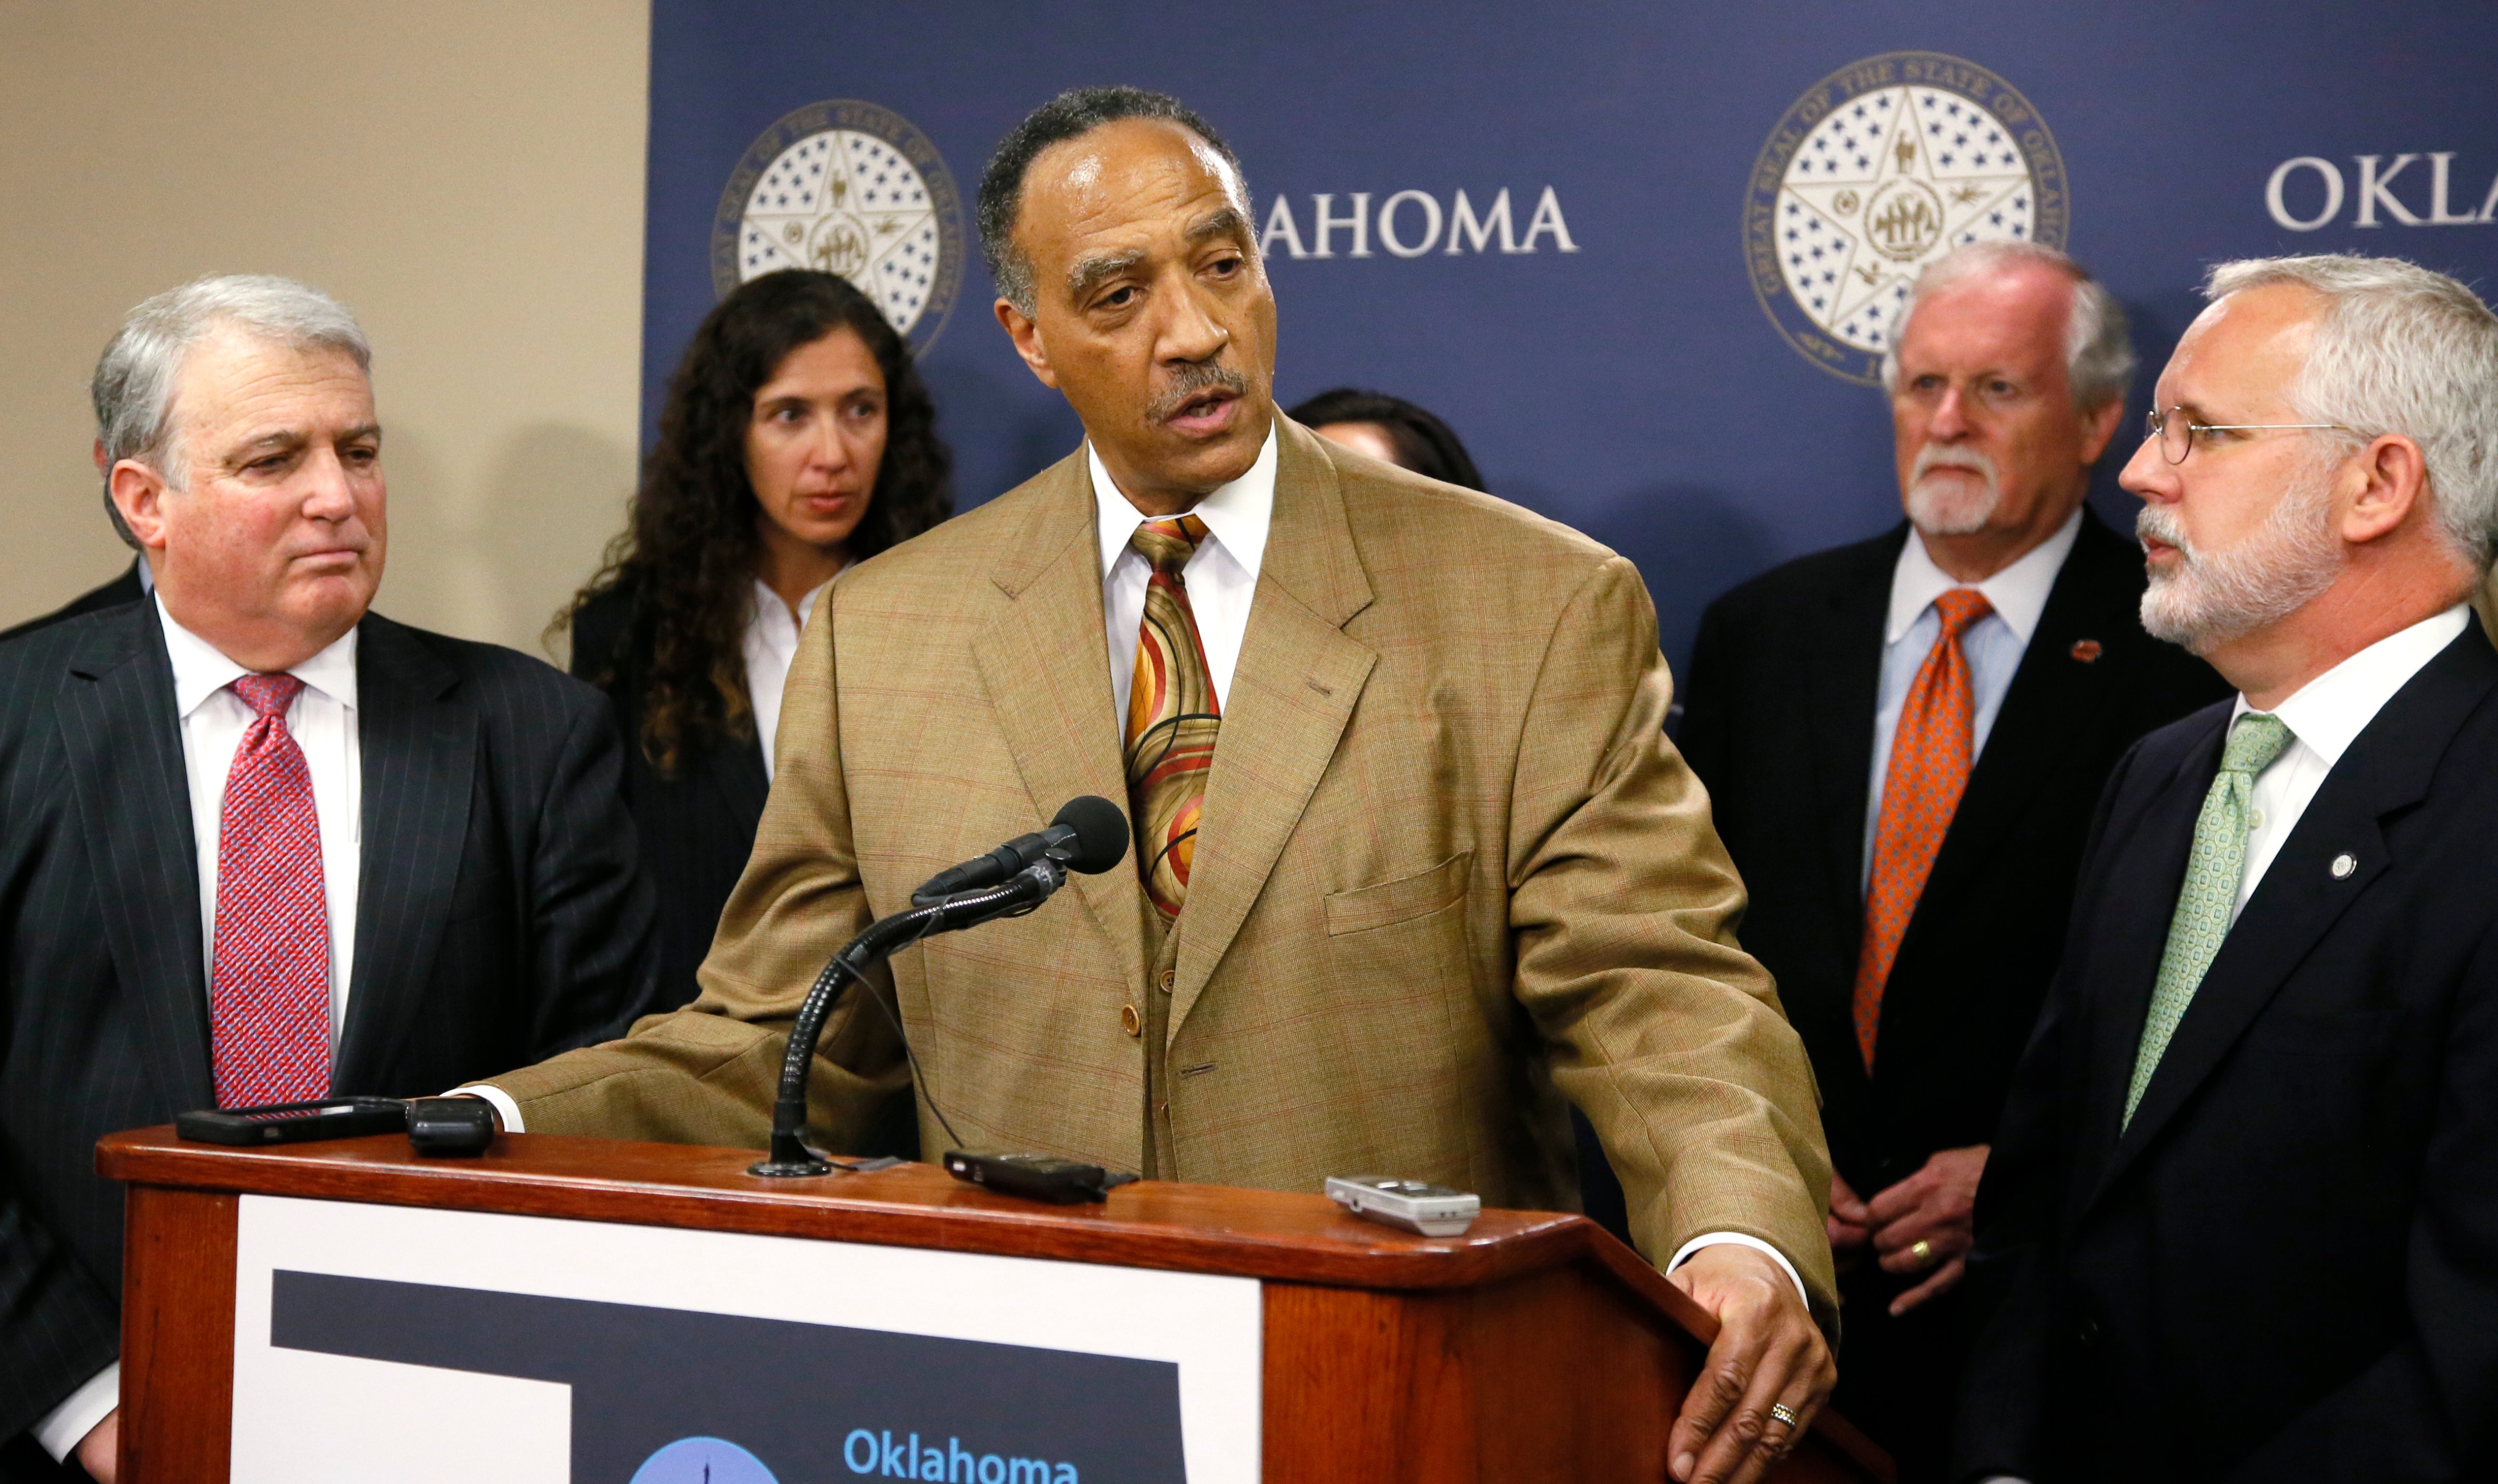 Robert H. Alexander, Jr., center, a member of the Oklahoma Death Penalty Review Commission, speaks during a news conference in Oklahoma City, Tuesday, April 25, 2017. The commission released a report that says the state should extend its moratorium on capital punishment. At left is Andy Lester and at right is former Oklahoma Gov. Brad Henry. (AP Photo/Sue Ogrocki) (Sue Ogrocki&mdash;AP)